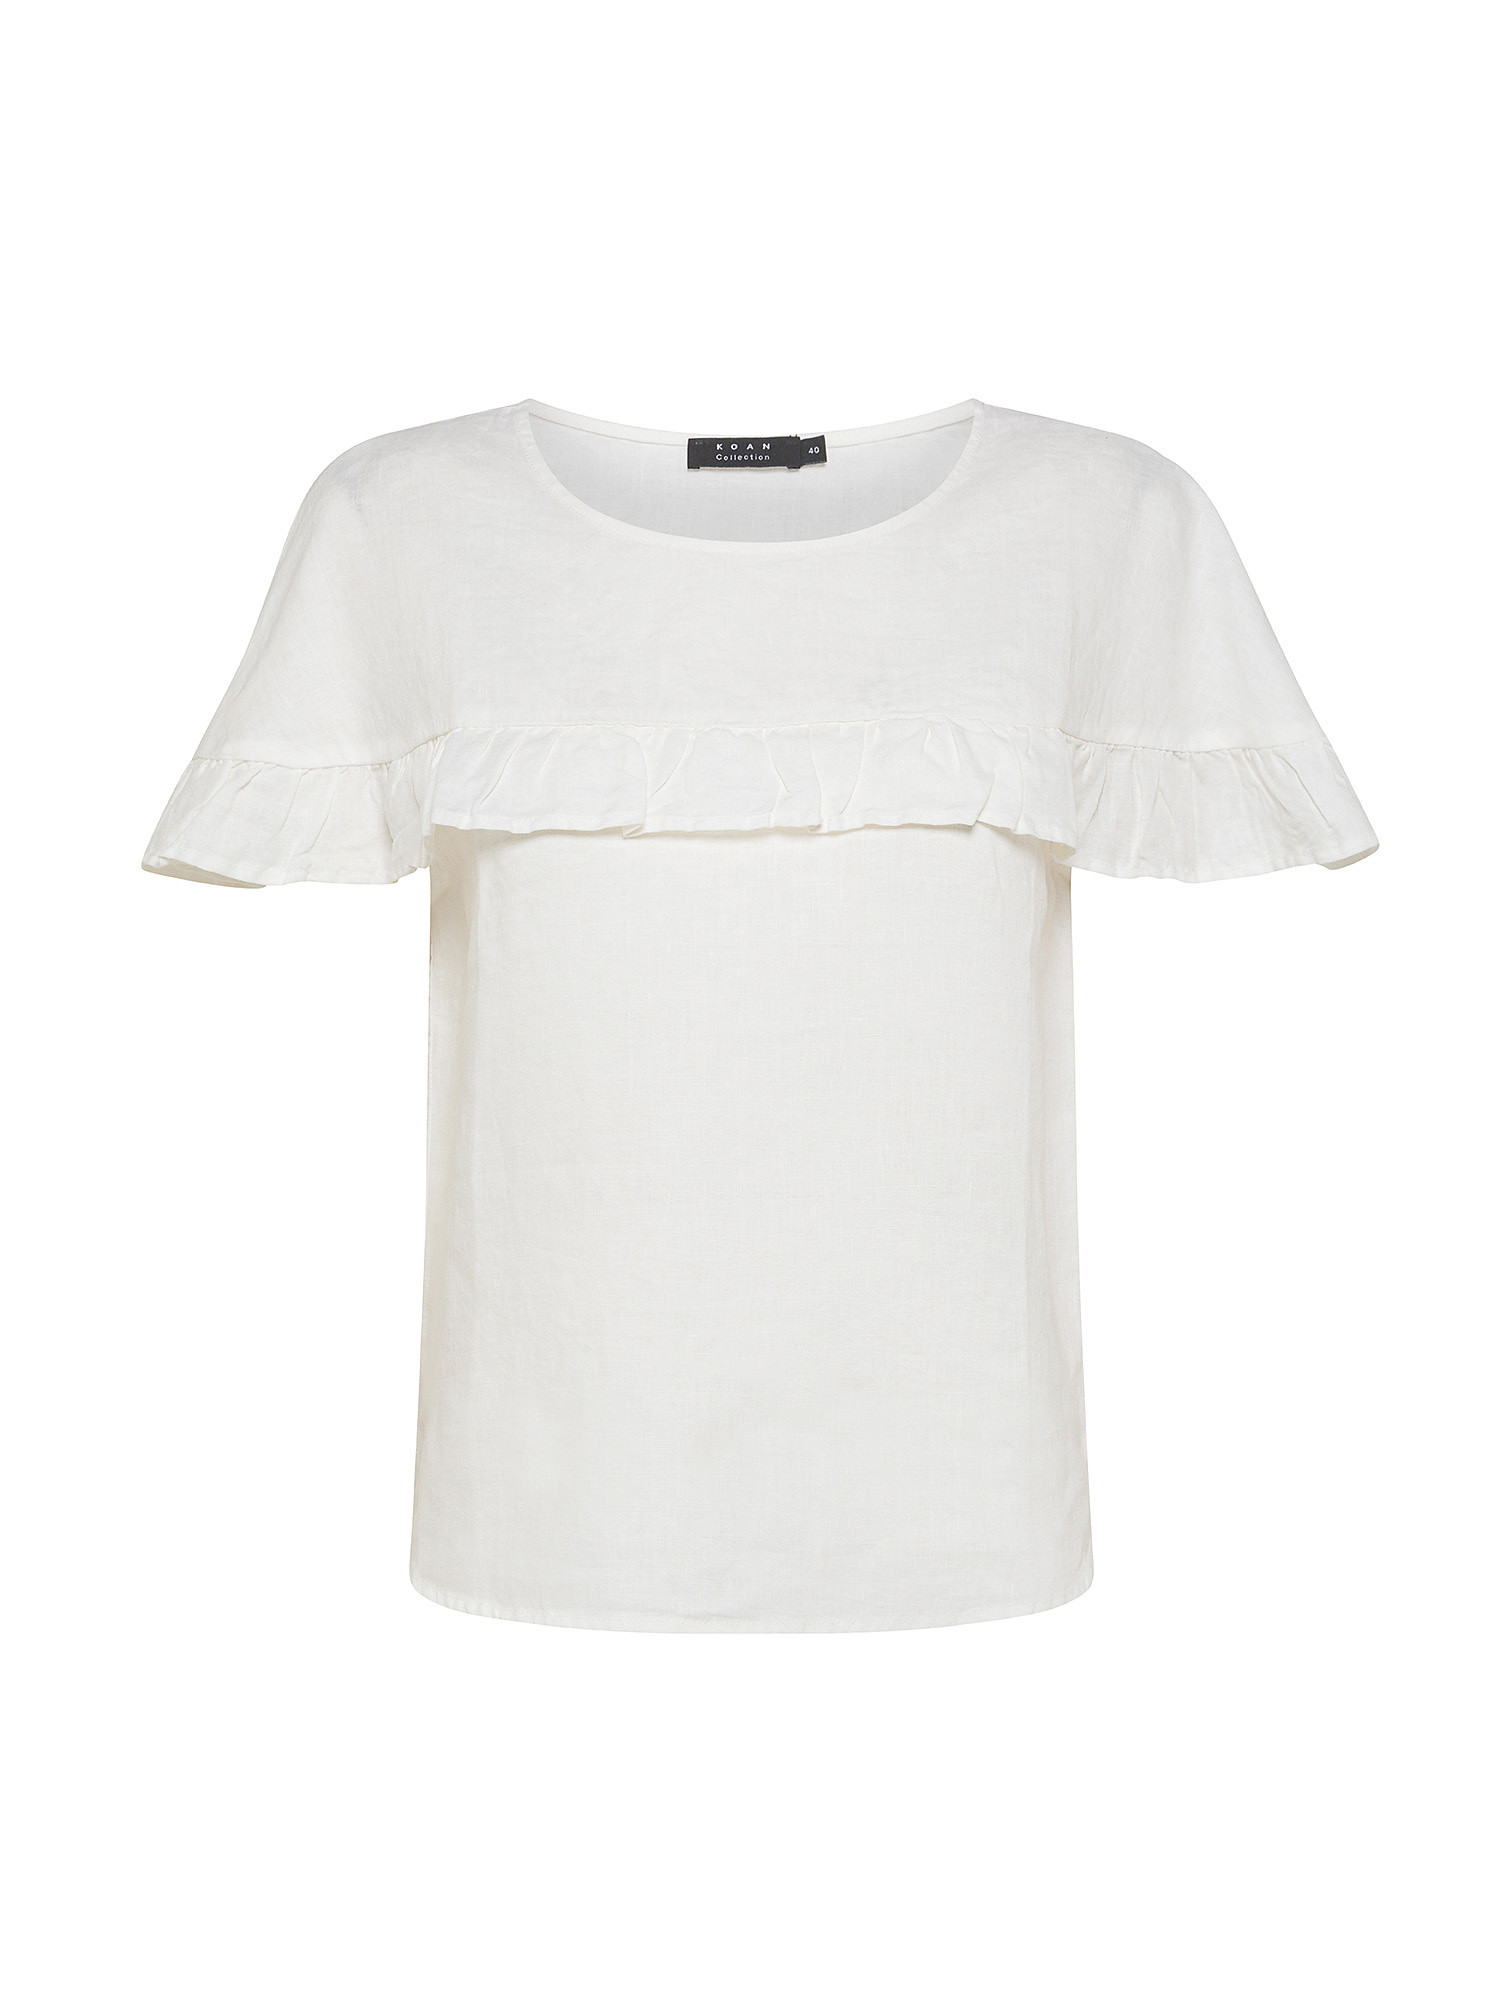 Koan - Blusa in lino con volant, Bianco, large image number 0